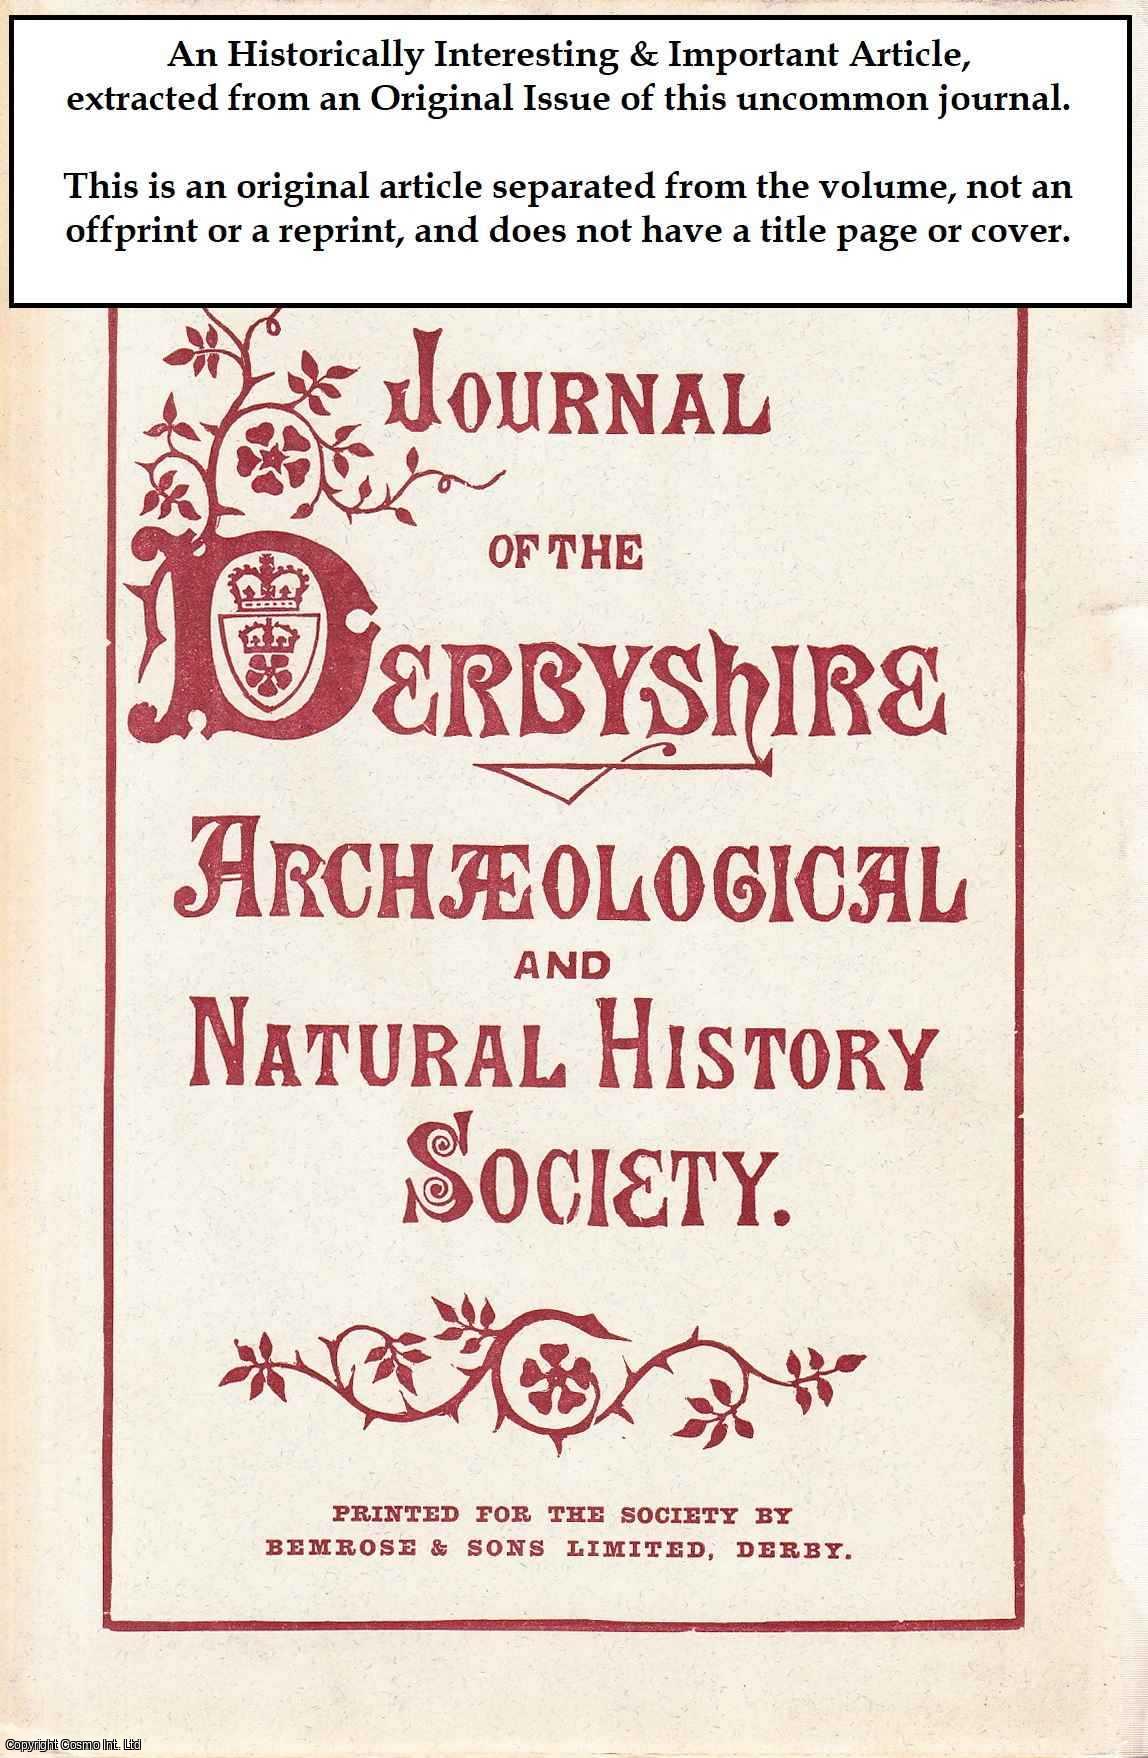 W. Turner - Old Buxton and District. An original article from the Journal of the Derbyshire Archaeological & Natural History Society, 1903.